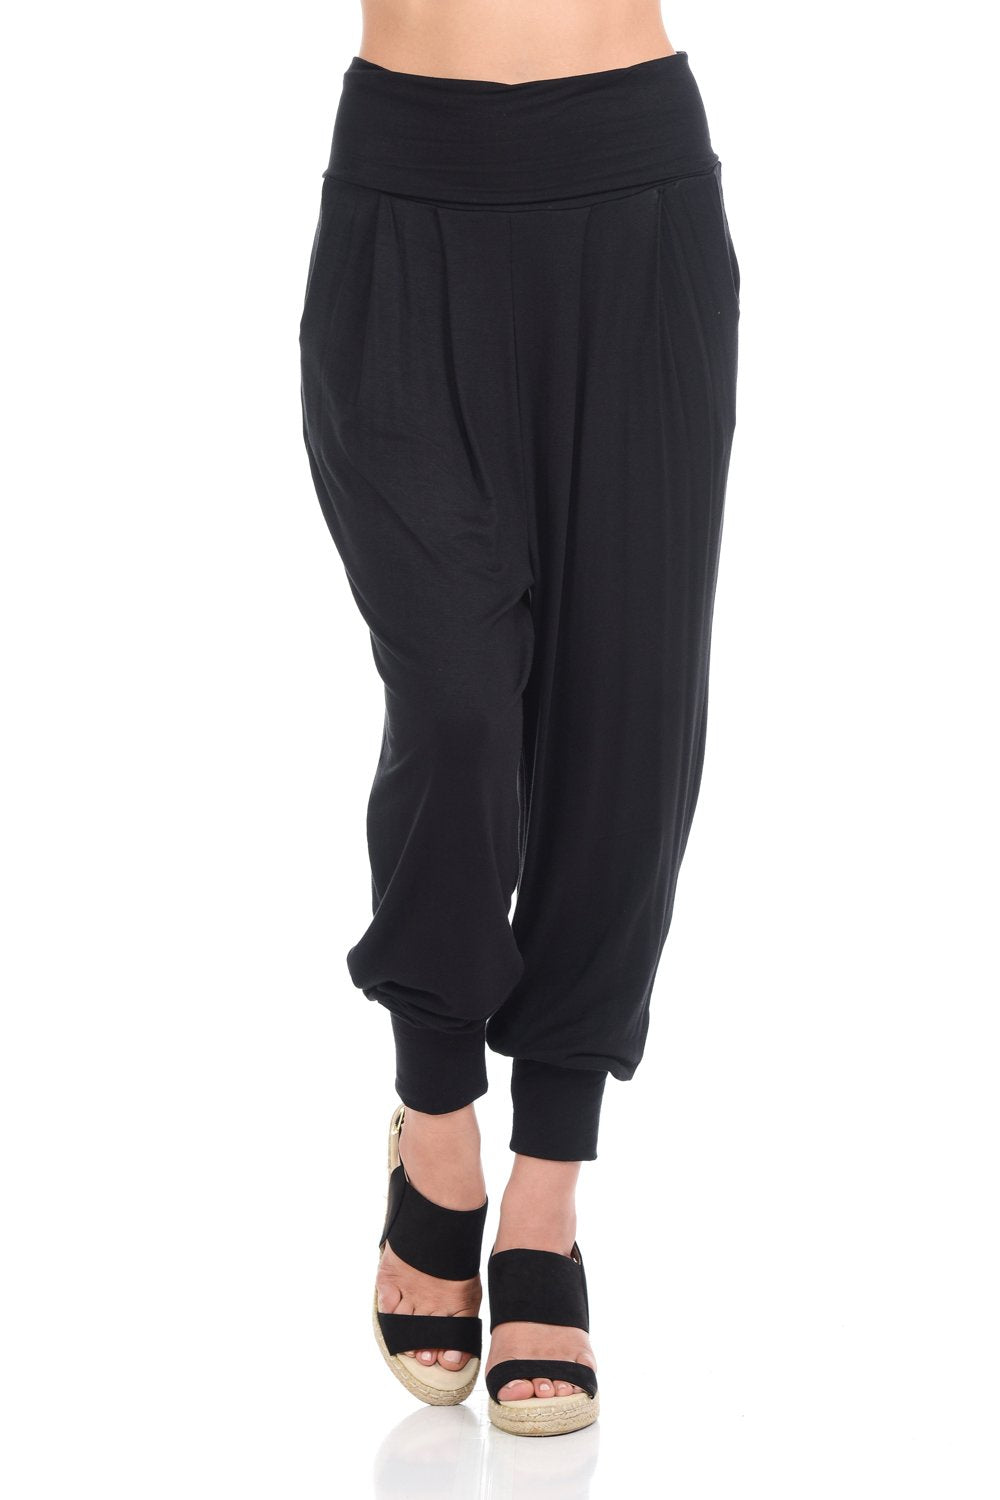 Banded Waist Harem Jogger Pants with Pockets – iconic luxe